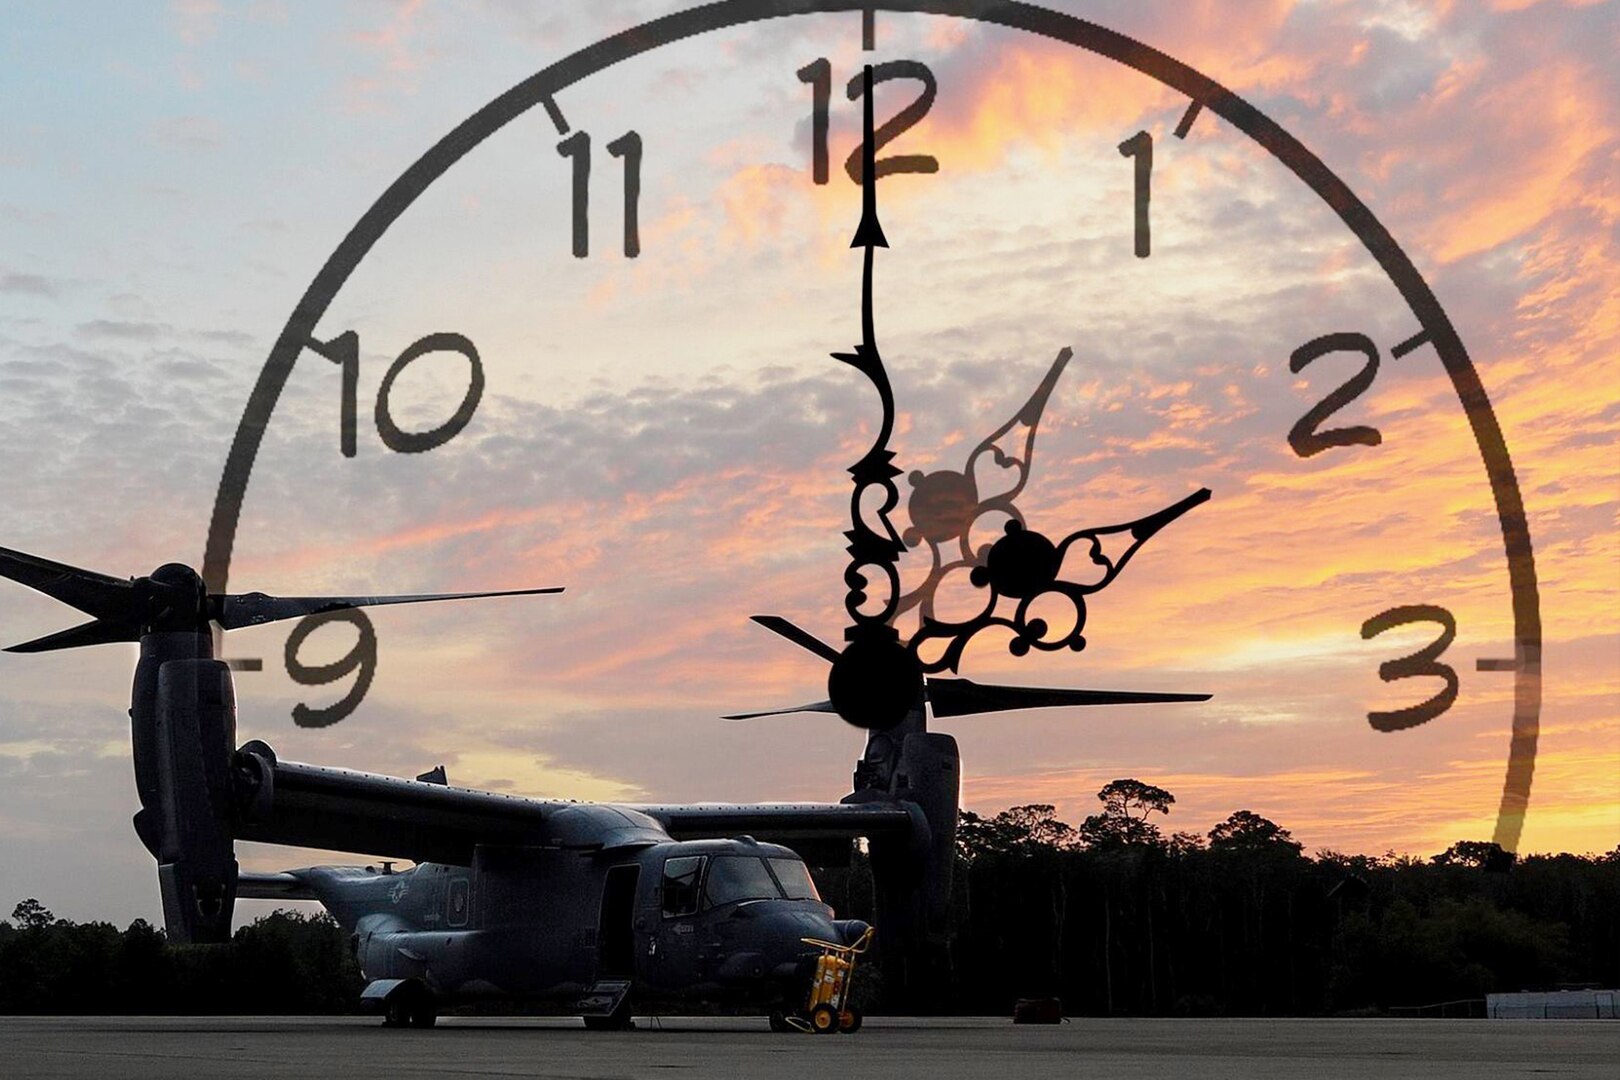 DOD service members, civilians and contractors: don't forget to spring your clocks forward one hour this weekend for daylight saving time!